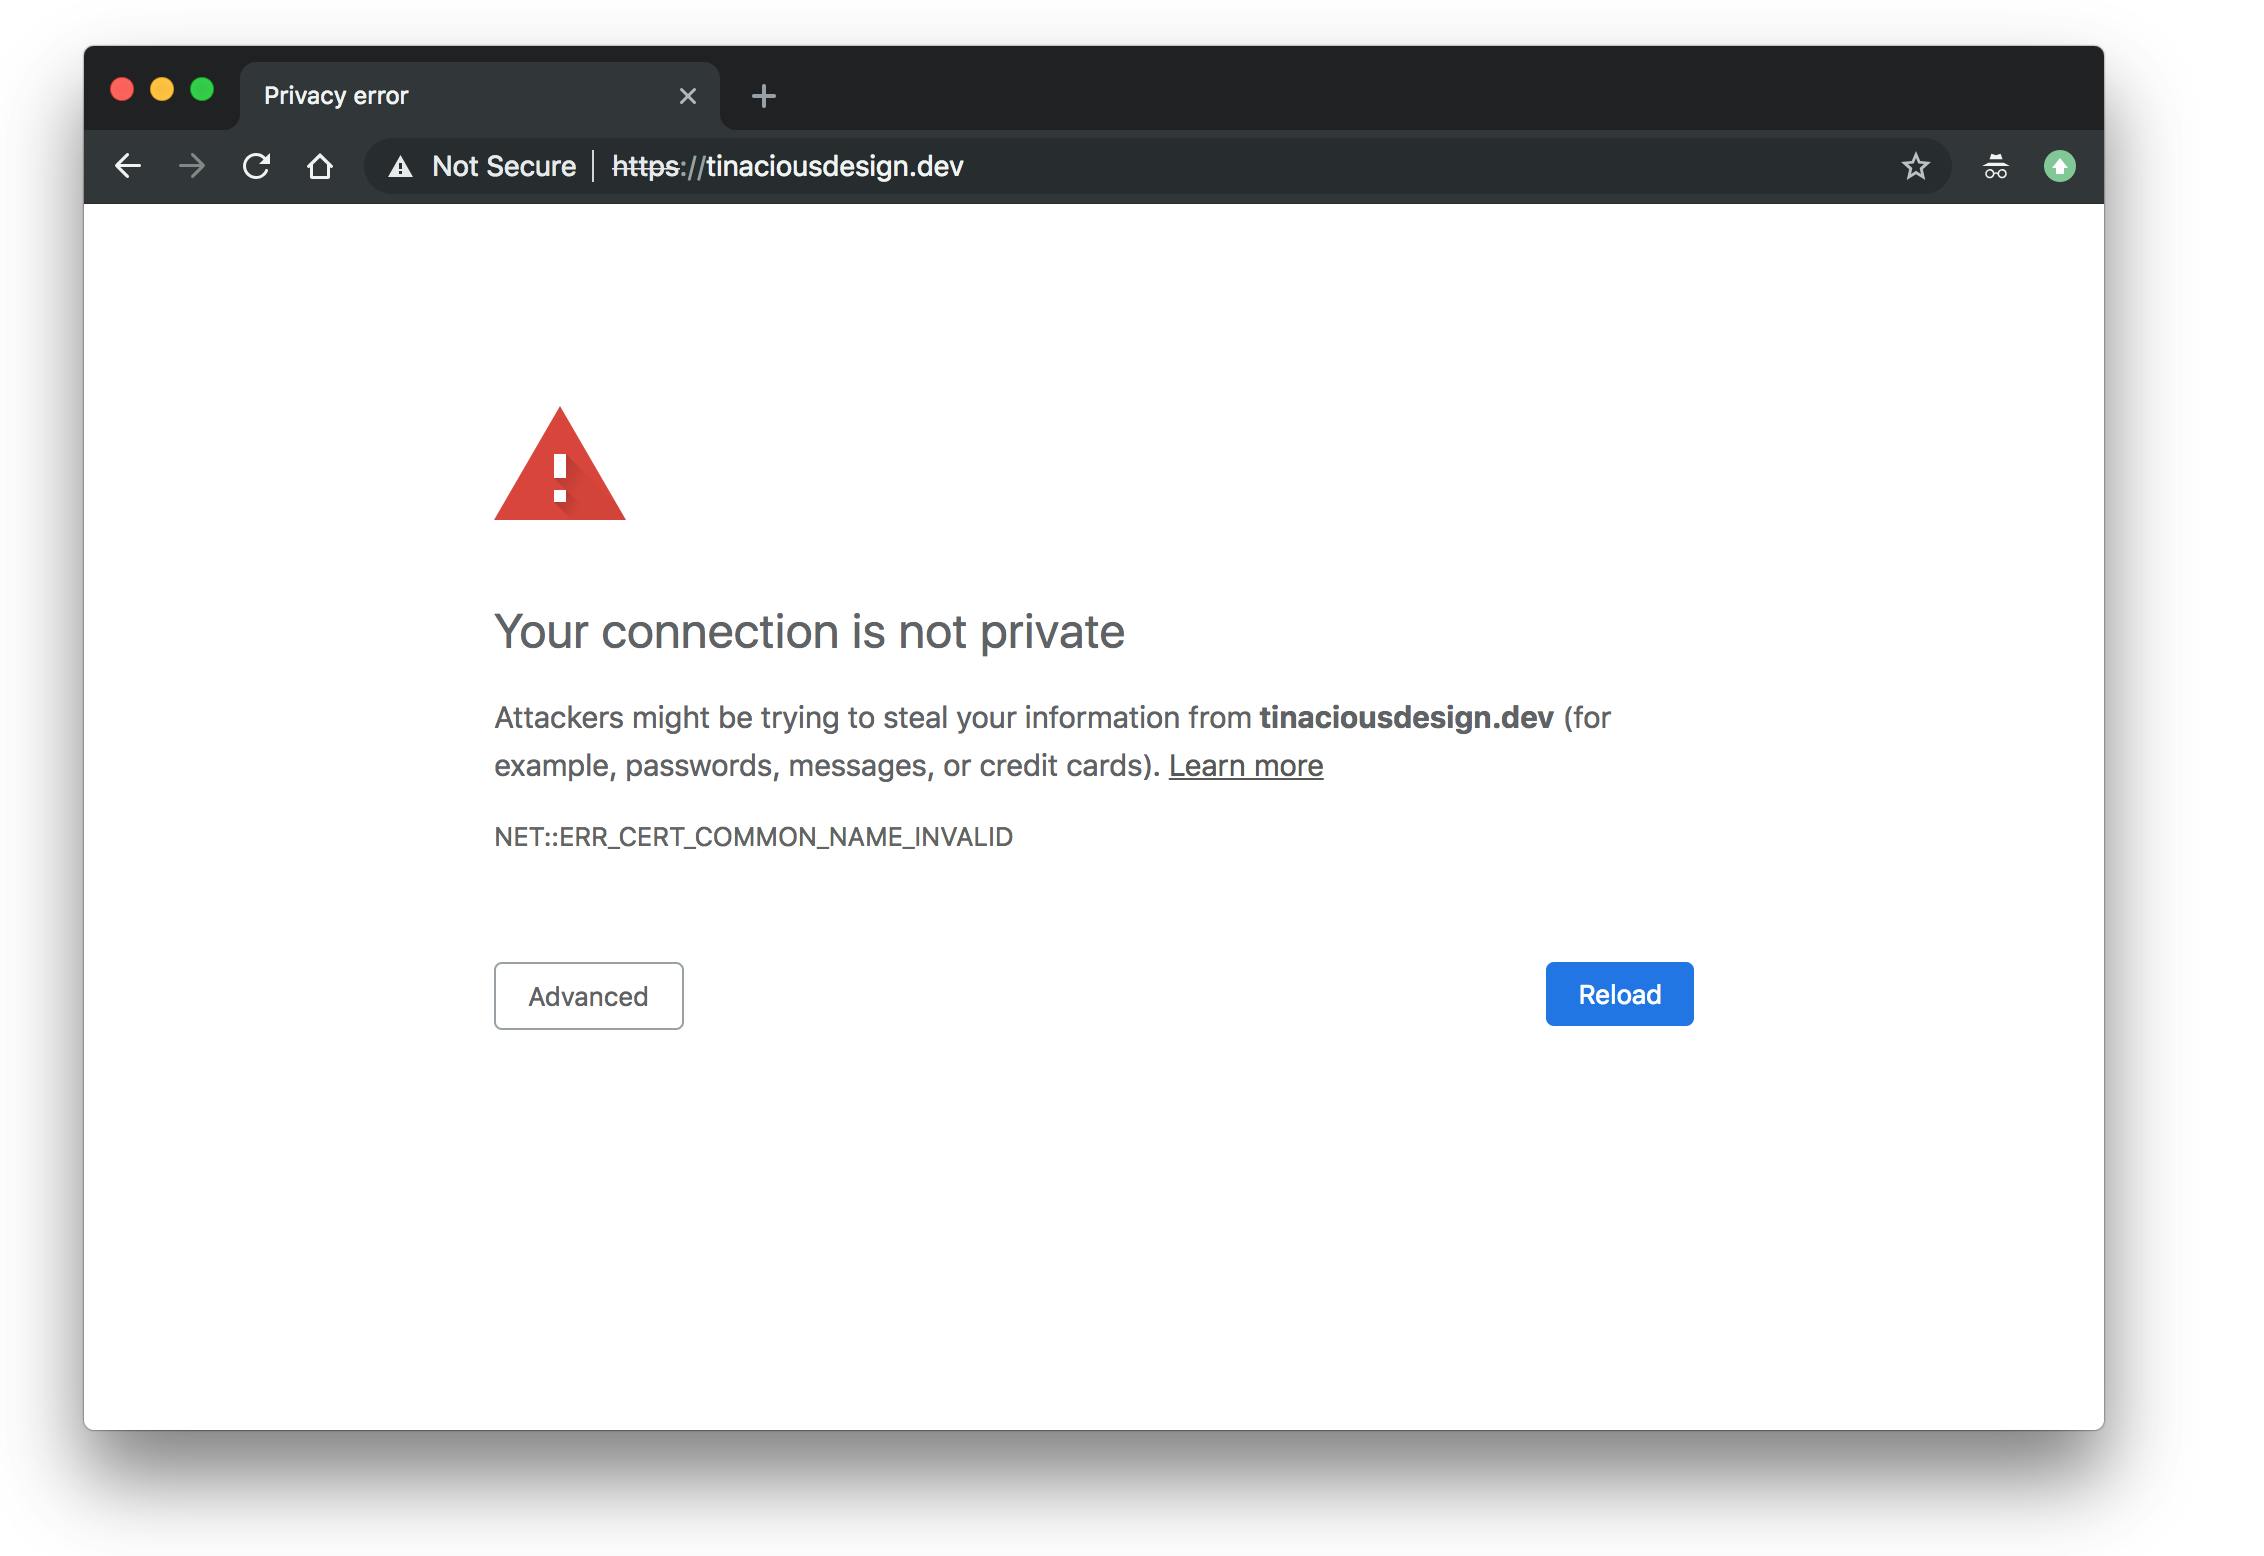 Chrome warns that the common name is invalid with NET::ERR_CERT_COMMON_NAME_INVALID